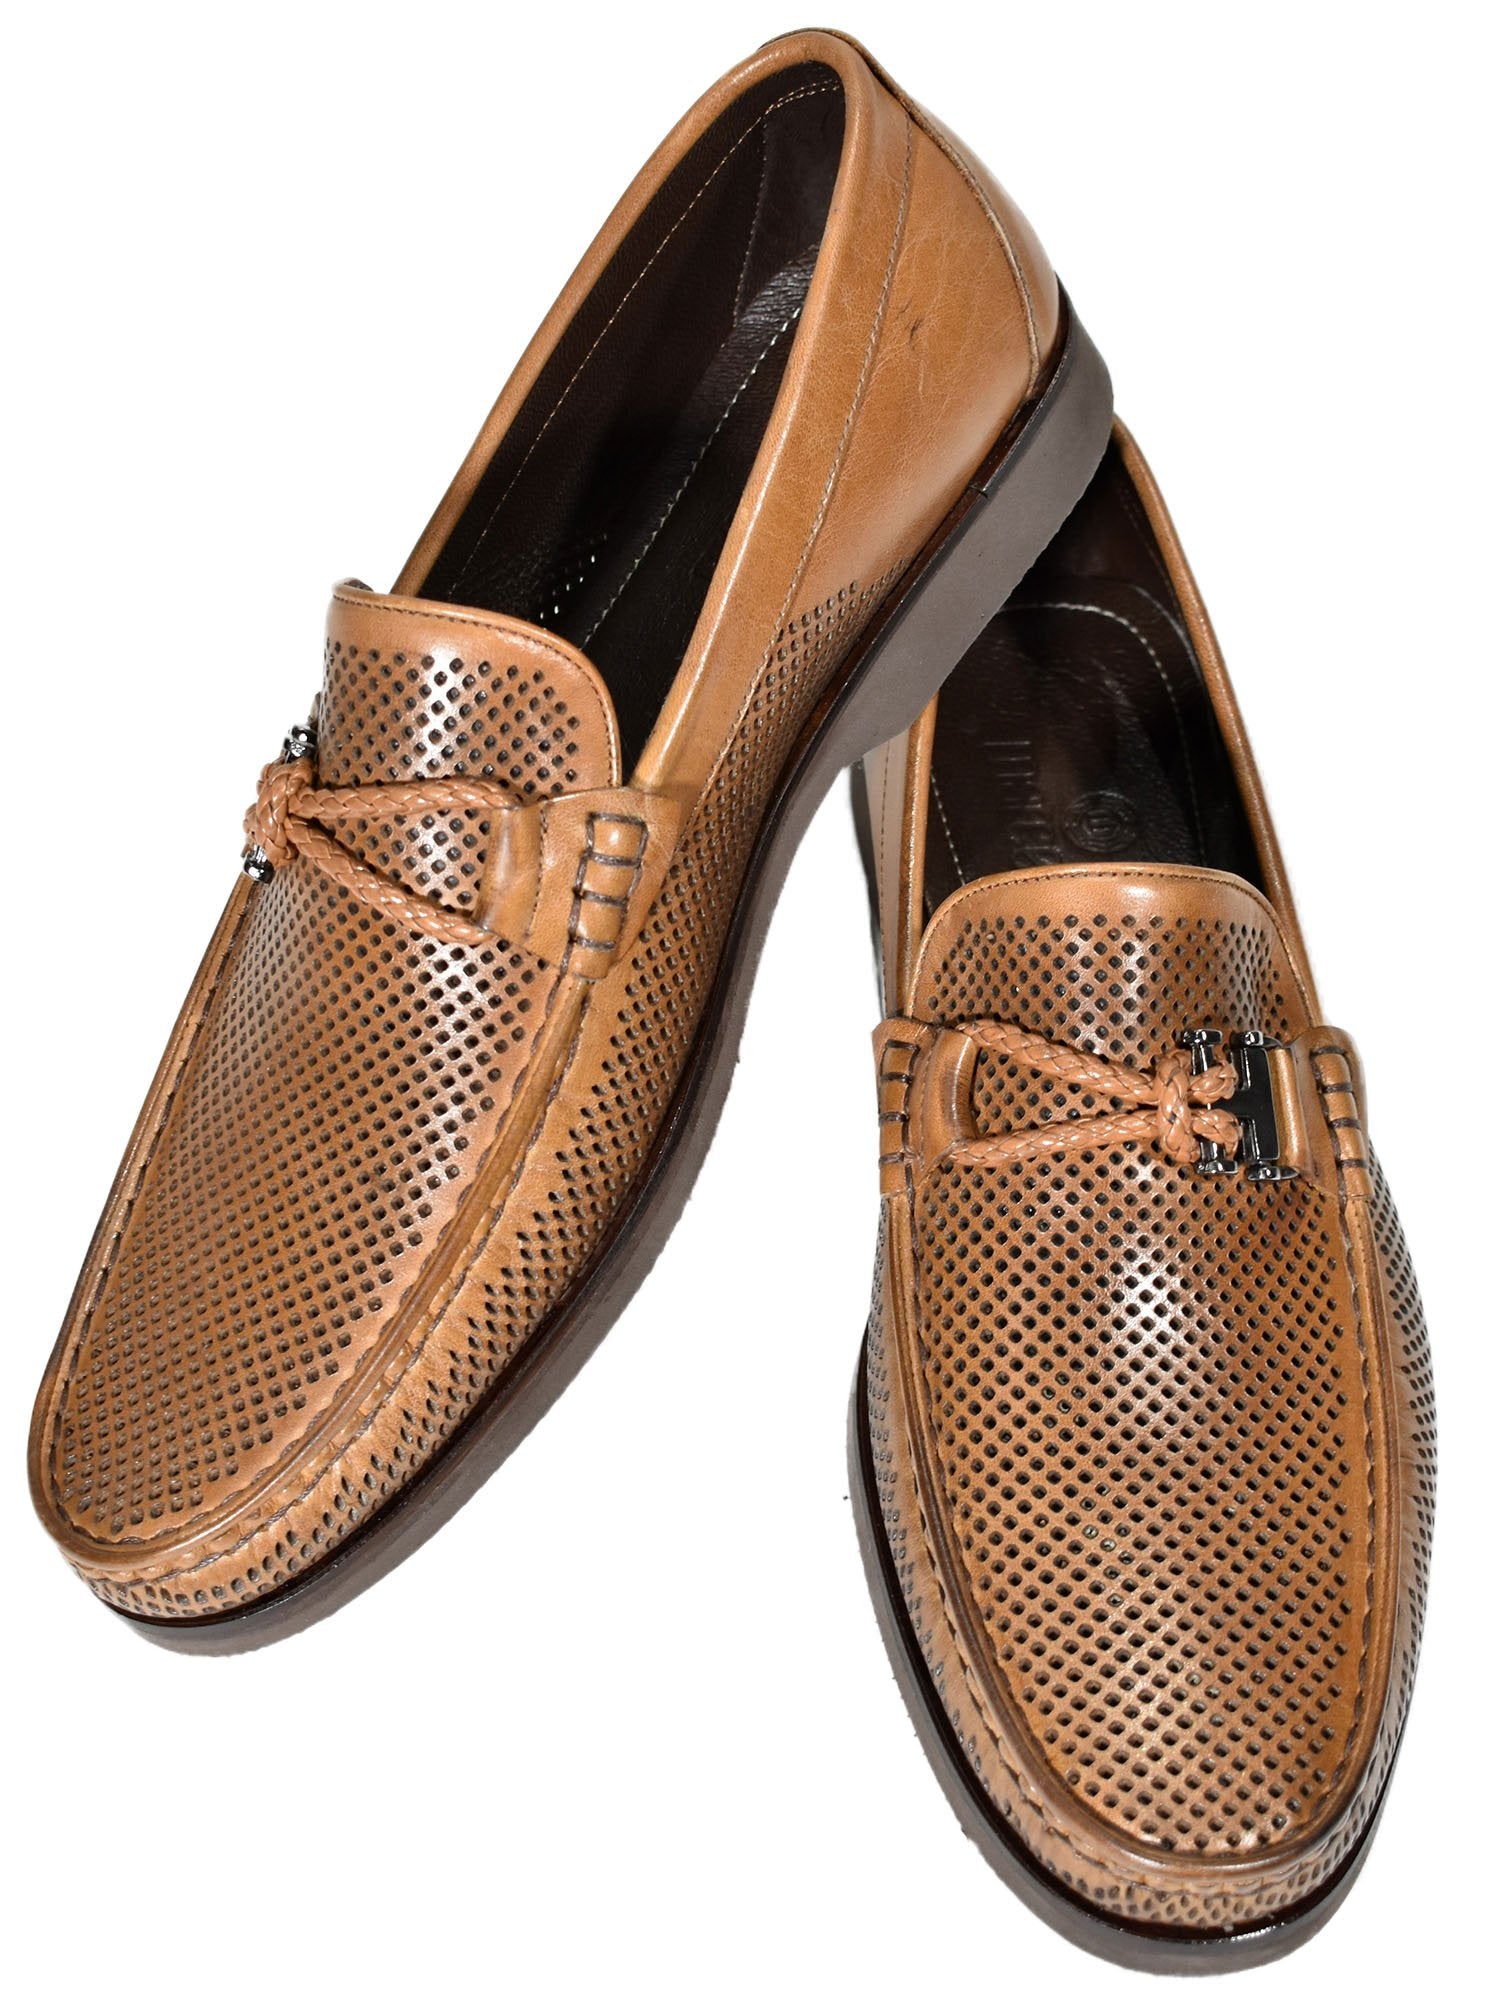 Marcello Cognac Perforated Leather Shoes  Soft perforated leather for an updated traditional look. Heal sole pillow for added comfort. Unique braid accessory detailing. Rubber performance sole. Sizes 8-12, including half sizes. Classic fit. - Marcello Sport